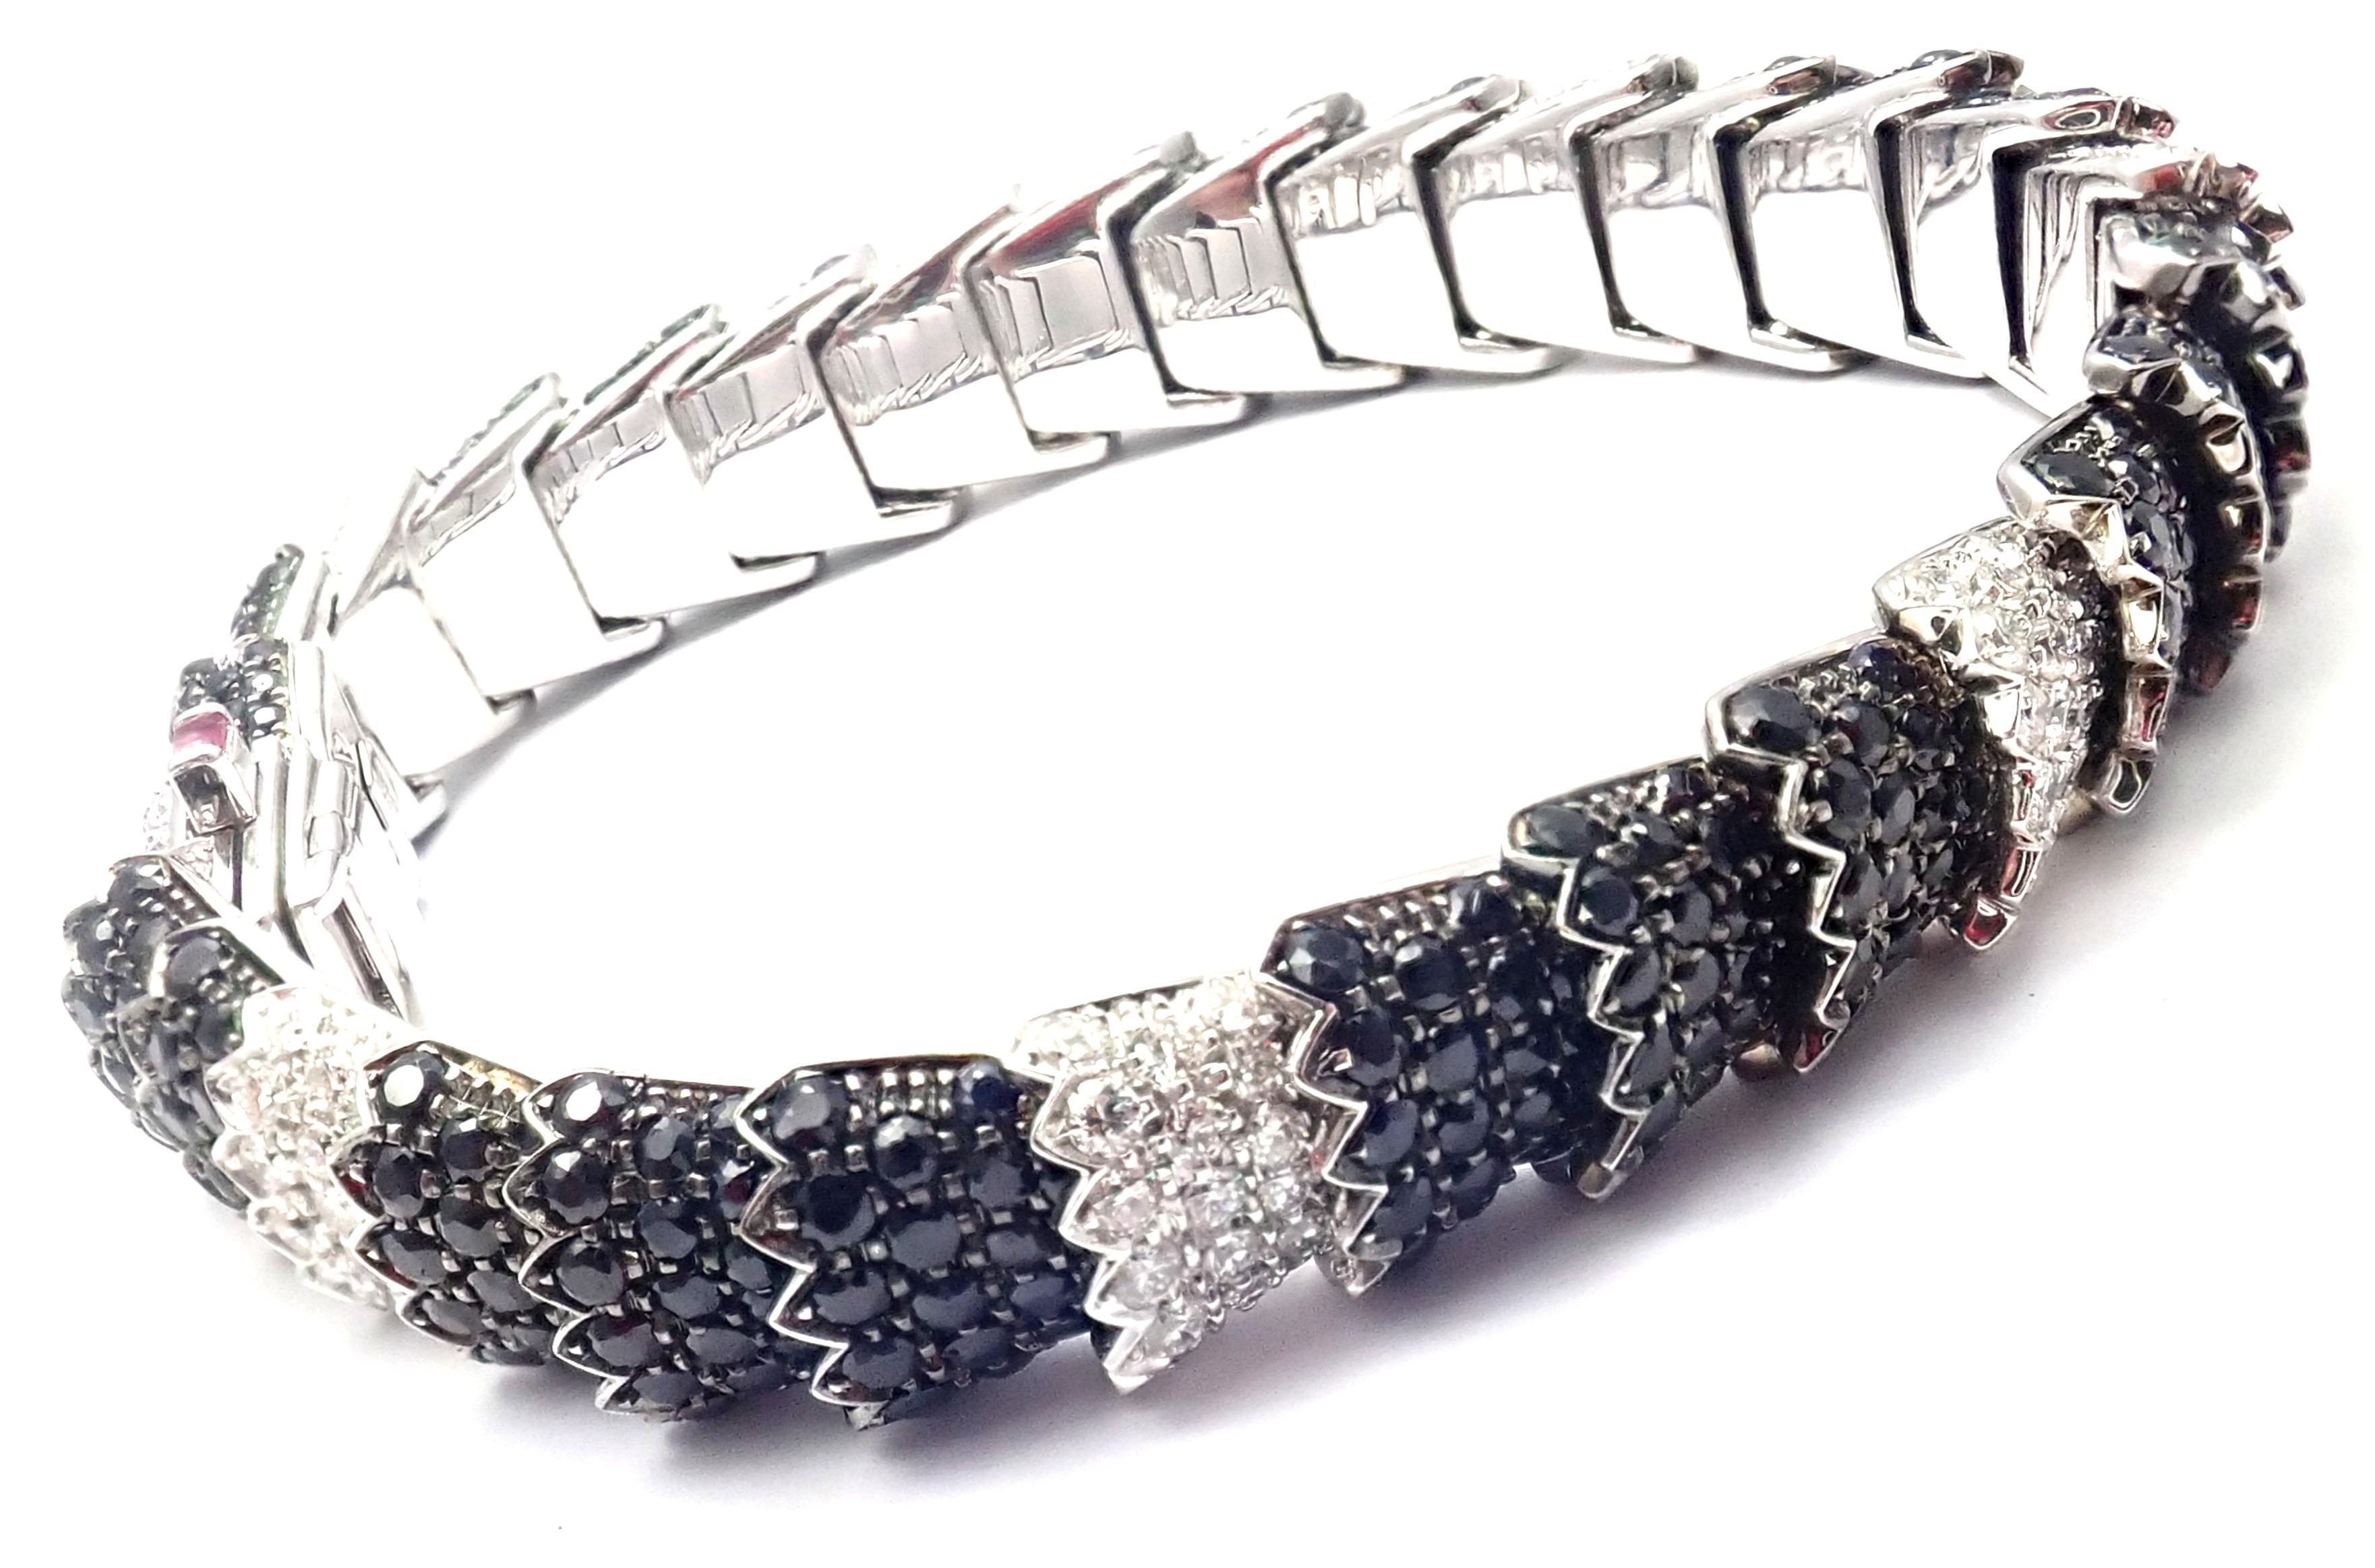 18k White Gold Diamond Black Sapphire Cobra Bracelet by Roberto Coin. 
With 198 round brilliant cut diamonds VS1 clarity, G color total weight approx. 5ct
528 black sapphires total weight approx. 13ct
1 Ruby
Details:
Weight:  46.2 grams
Length: 